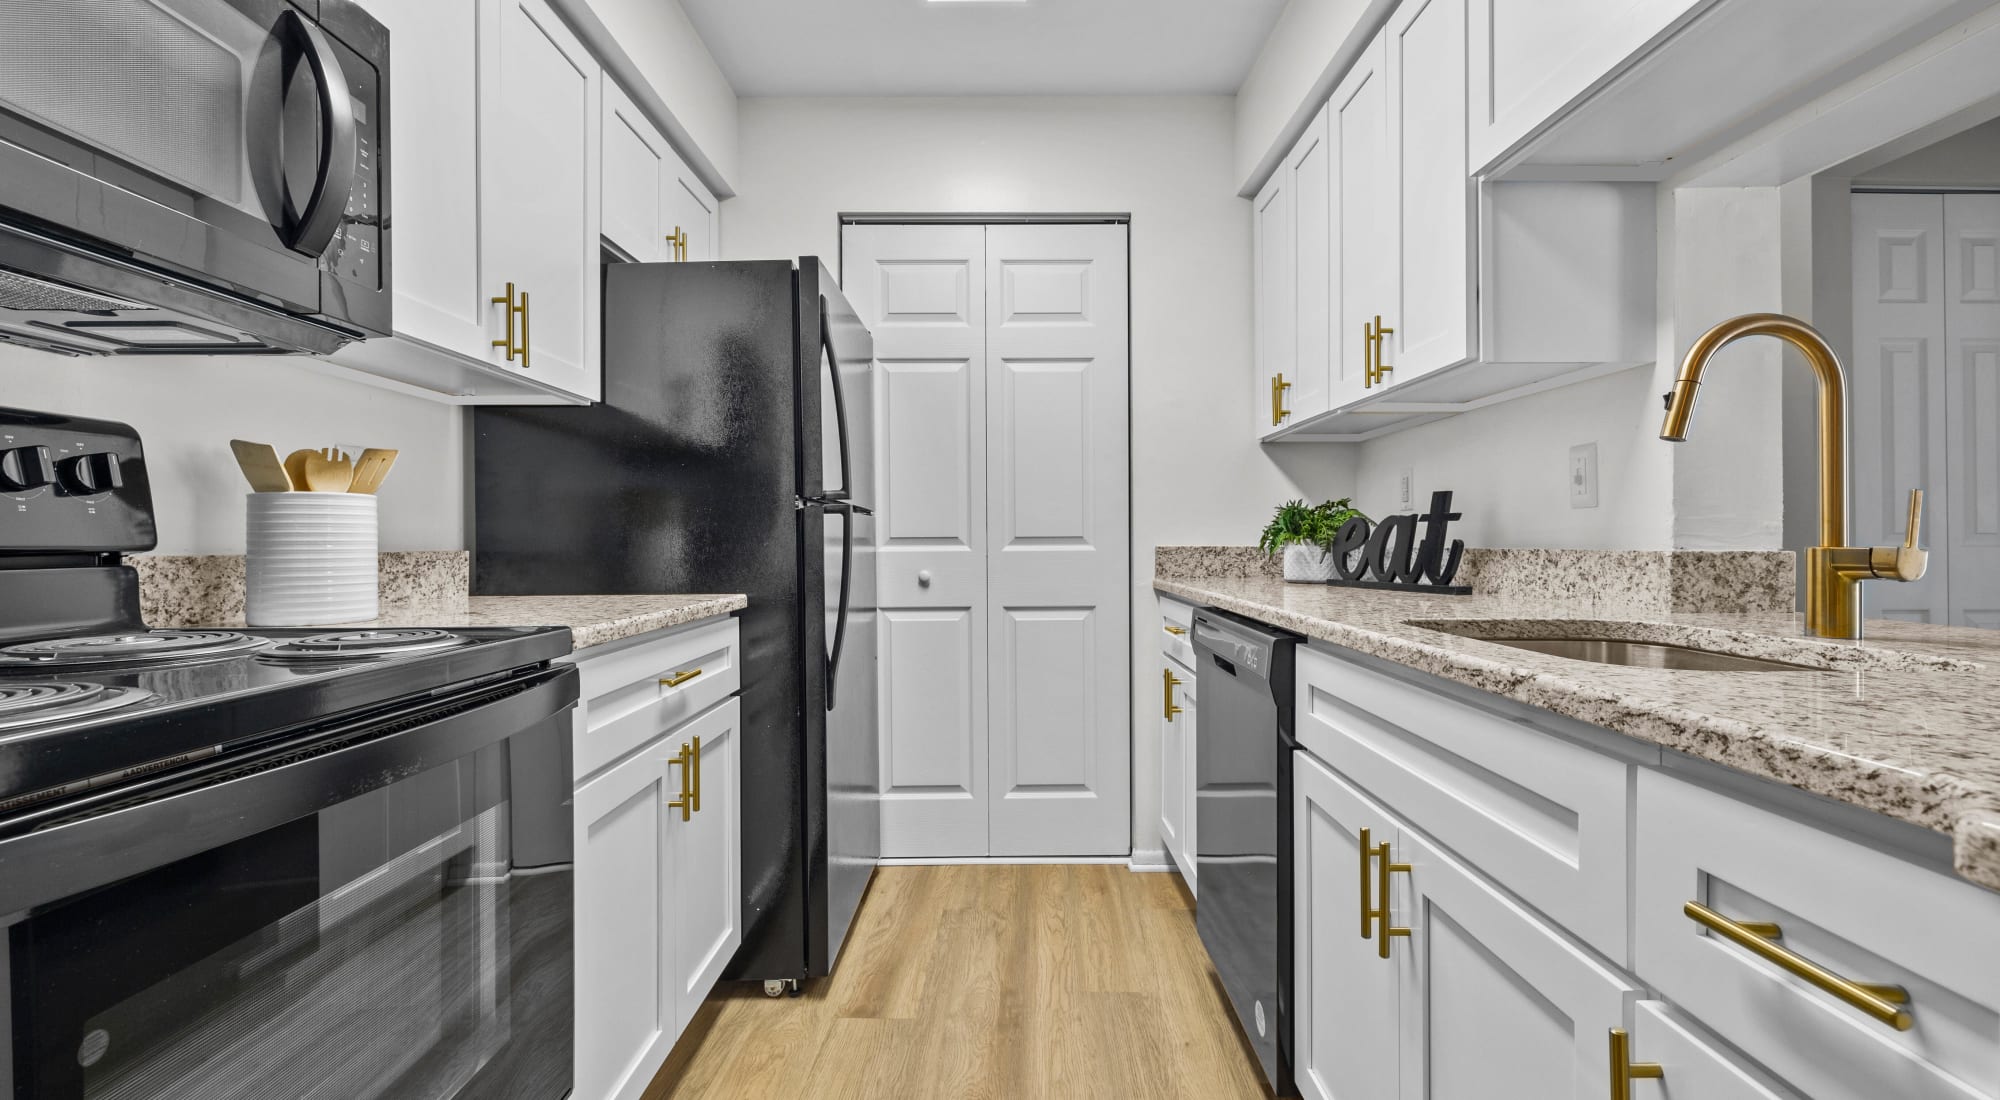 Model kitchen with modern appliances at Runaway Bay Apartments in Virginia Beach, Virginia